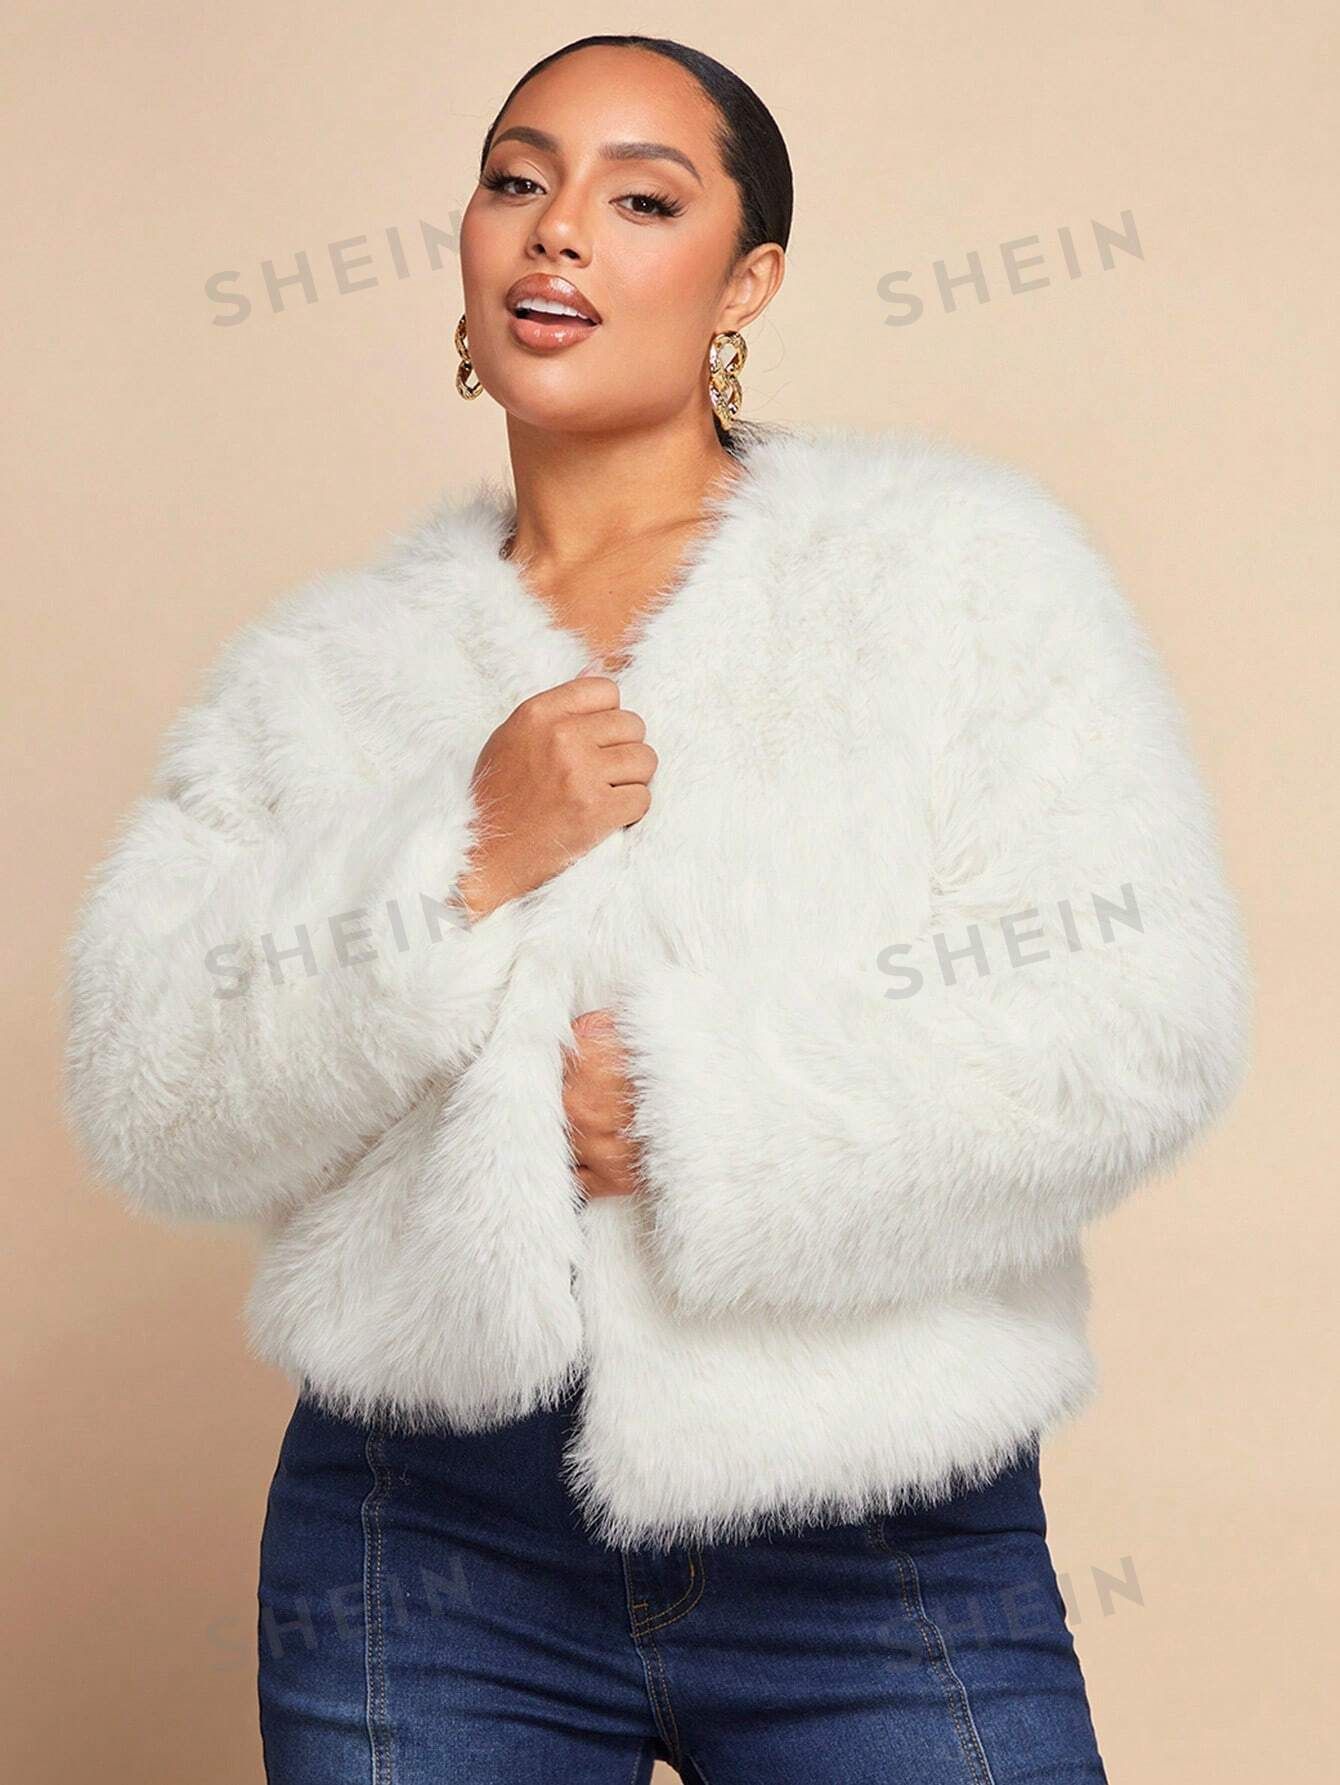 SHEIN BAE Party Plus-size White Plush Coat, New Year's Eve Costume | SHEIN